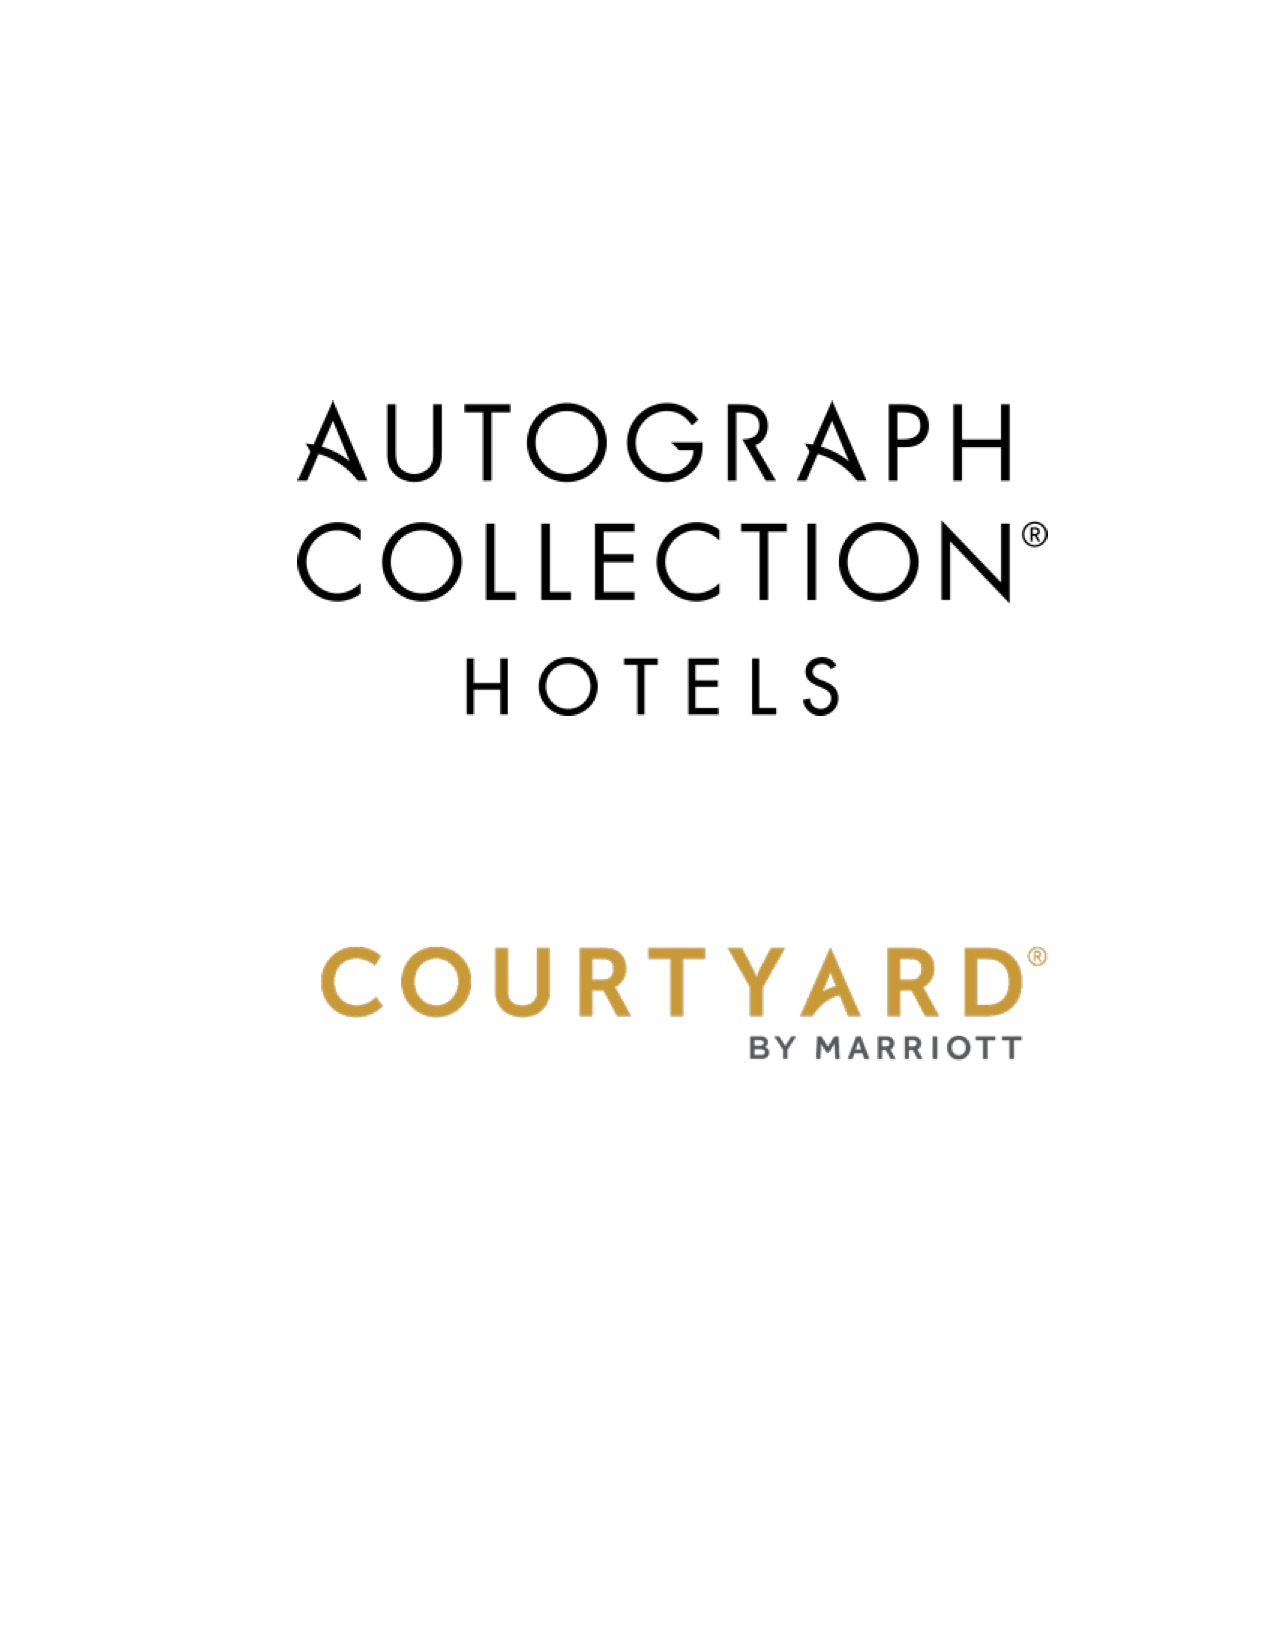 Autograph CollectionCourtyard by Marriott Hotel